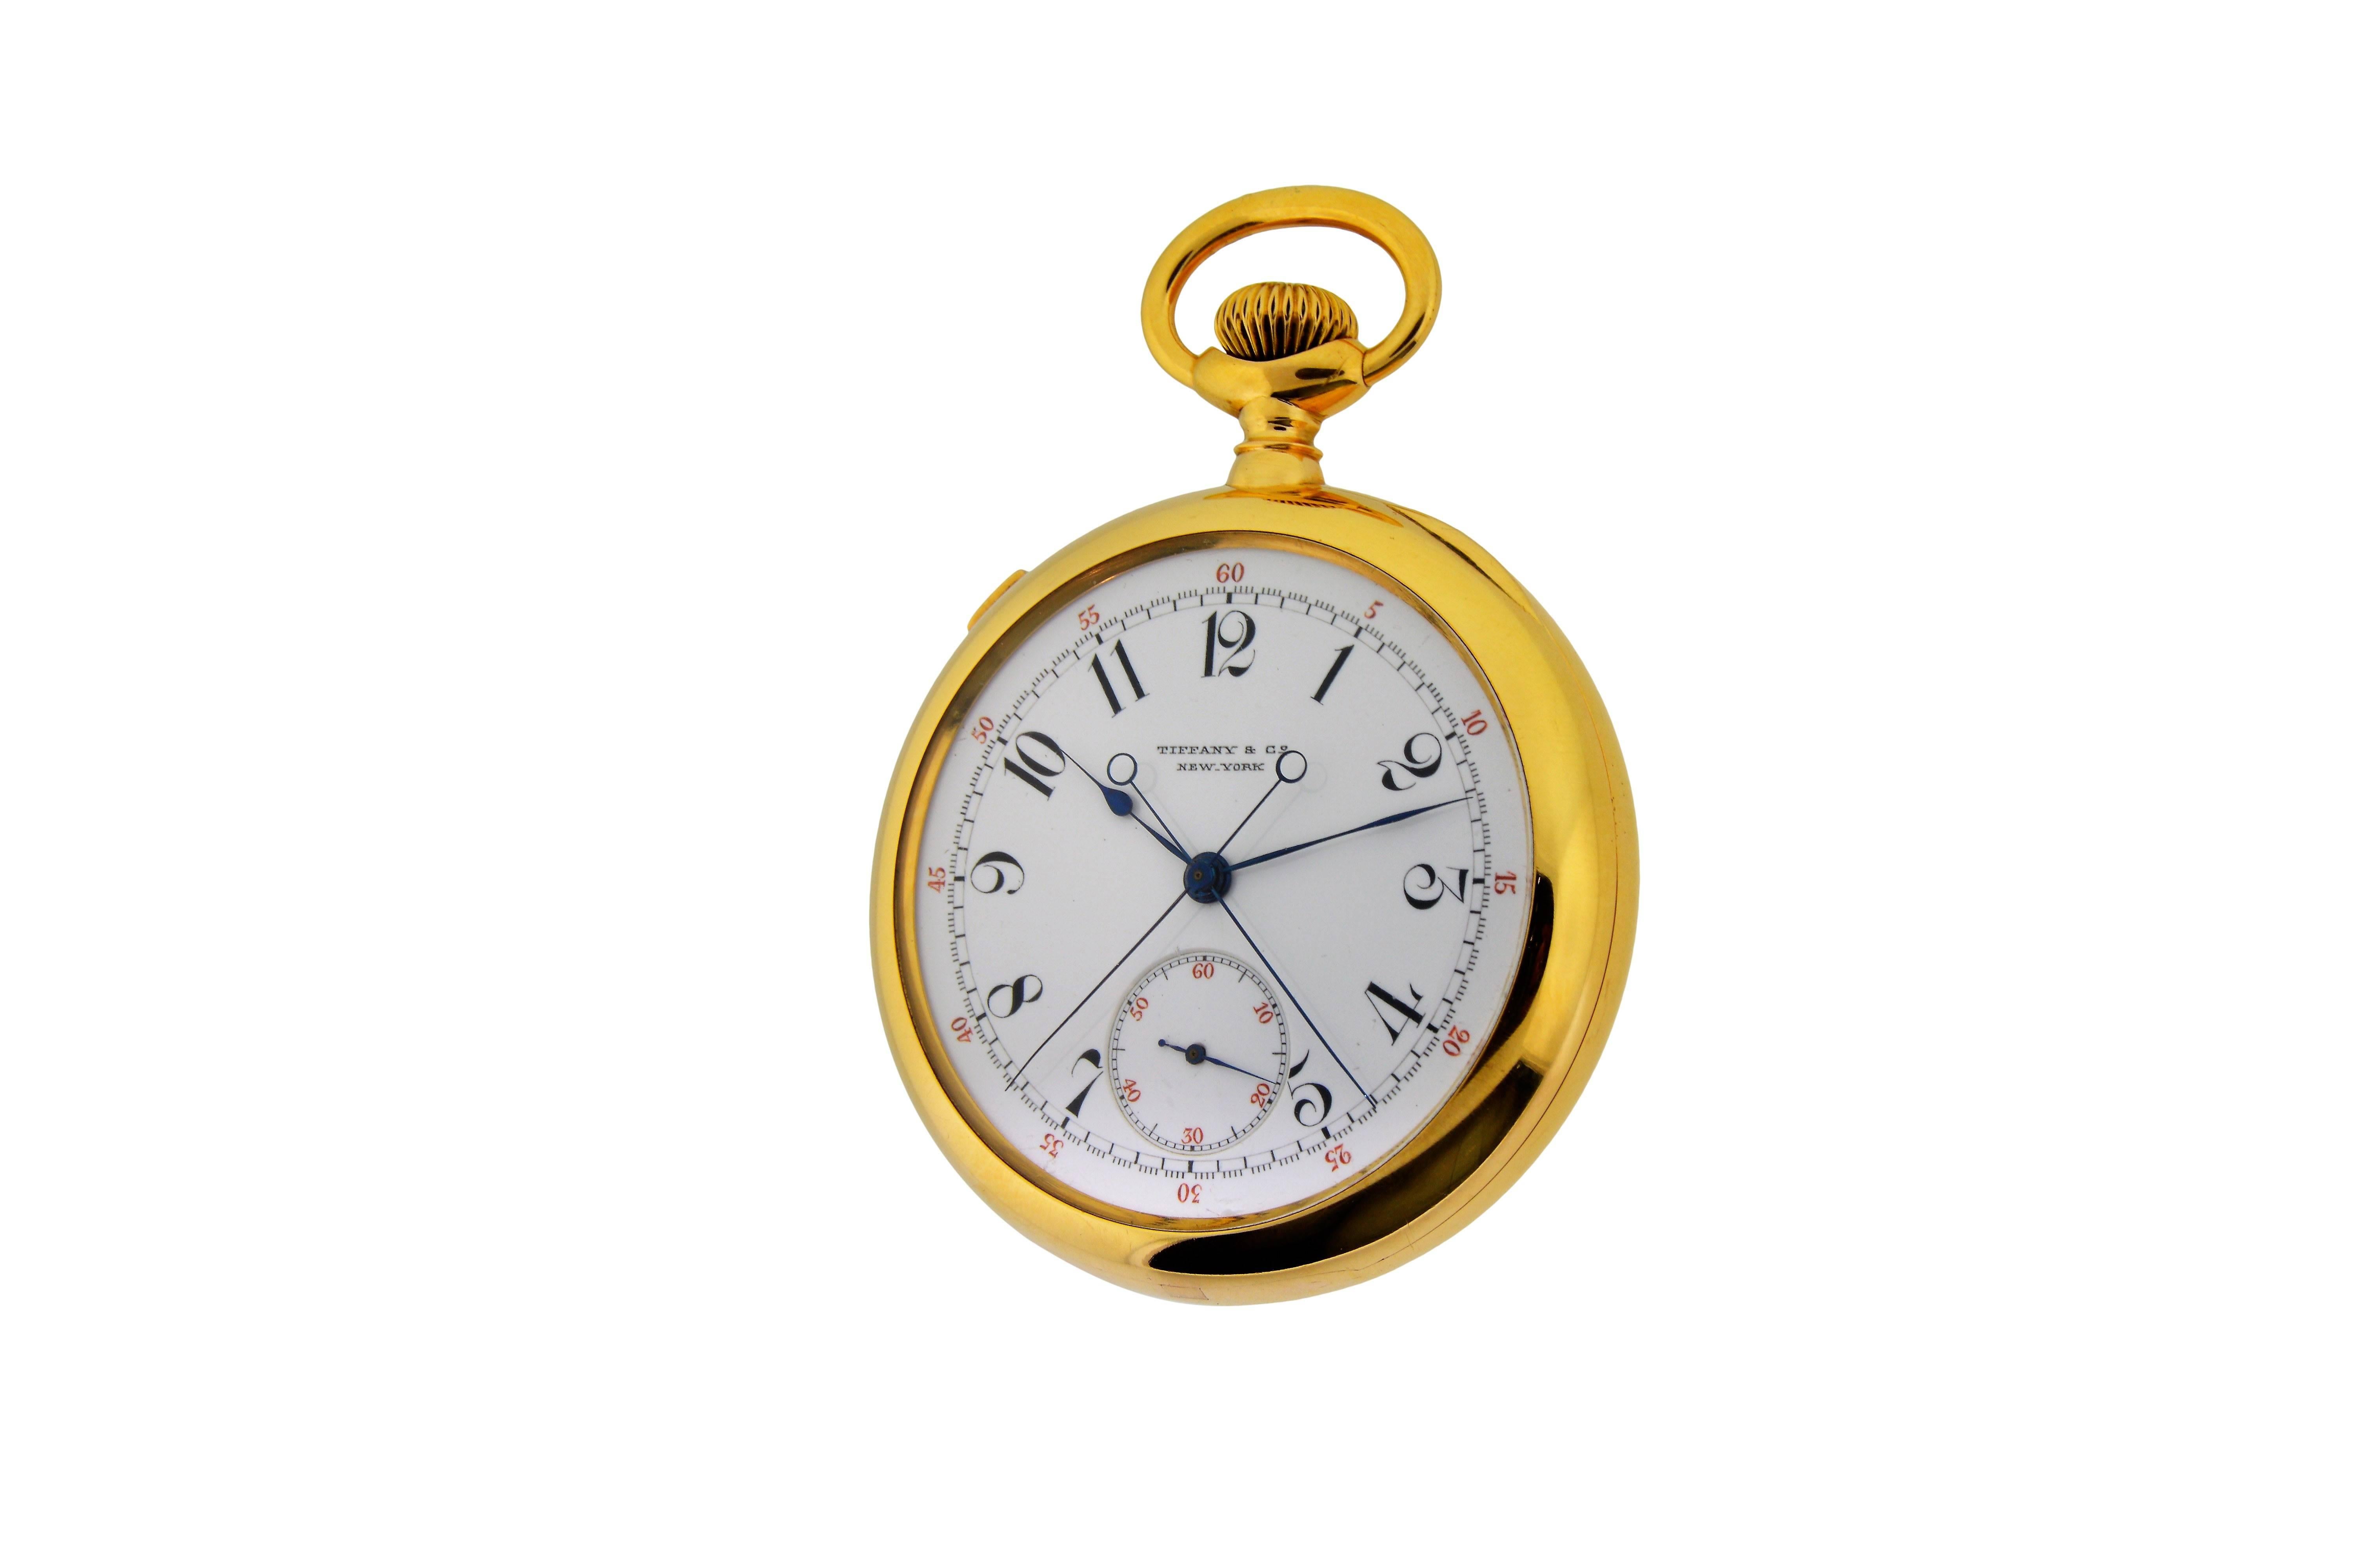 FACTORY / HOUSE: Patek Philippe / Tiffany and Company
STYLE / REFERENCE: Split Seconds Chronograph Pocket Watch
METAL / MATERIAL: 18 Kt. Rose Gold
DIMENSIONS:  52mm X 52mm
CIRCA: 1894
MOVEMENT / CALIBER: Manual Winding / 23 Jewels / 19 Ligne
DIAL /